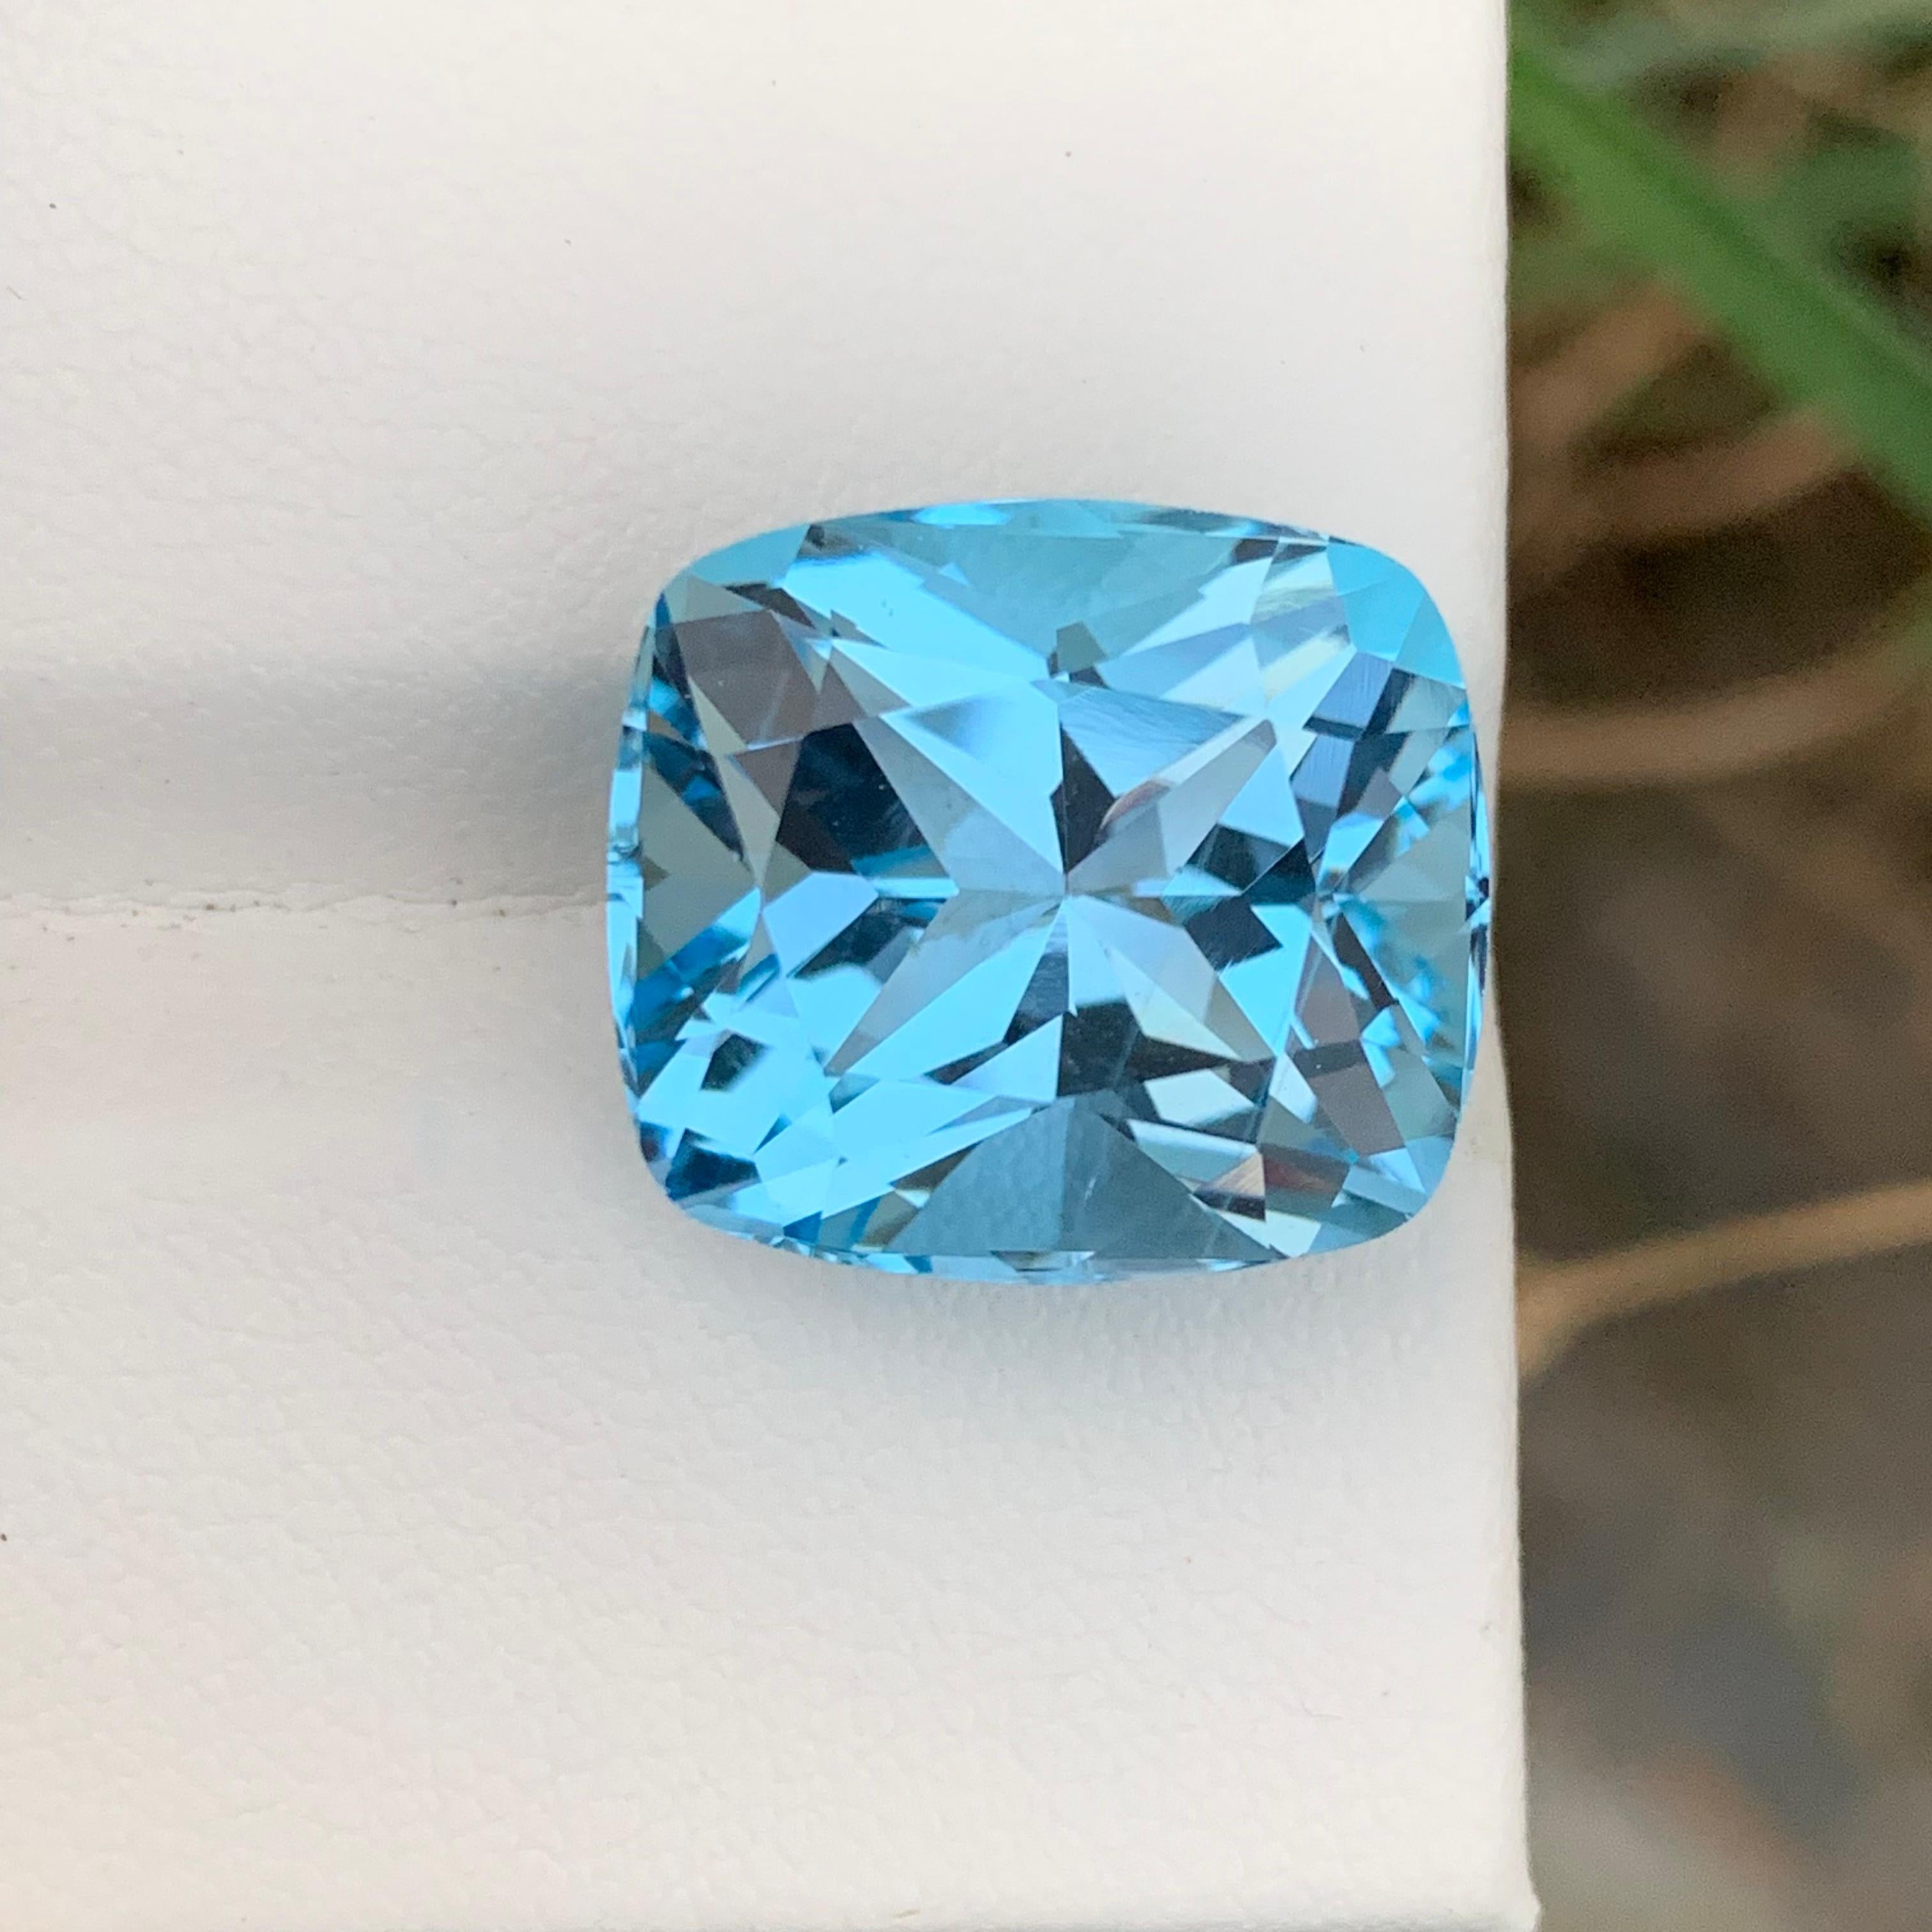 Women's or Men's Gorgeous 22.25 Carats Faceted Sky Blue Topaz Cushion Cut Gem From Brazil Mine  For Sale